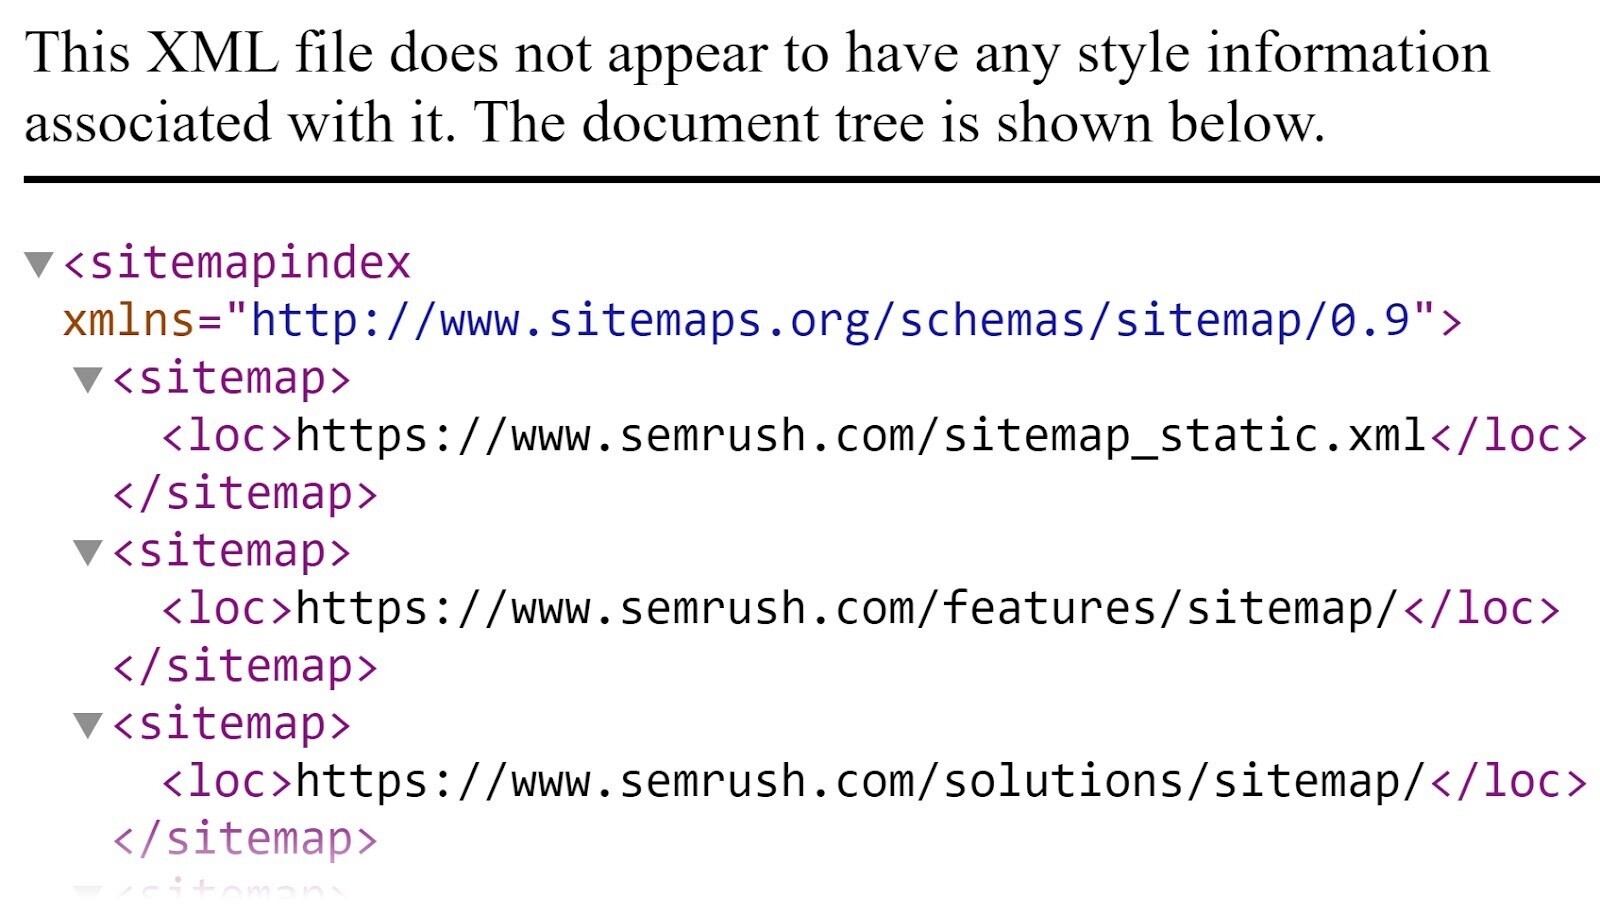 an example of a page saying "this XML file does not appear to have any style information associated with it. The document tree is shown below."